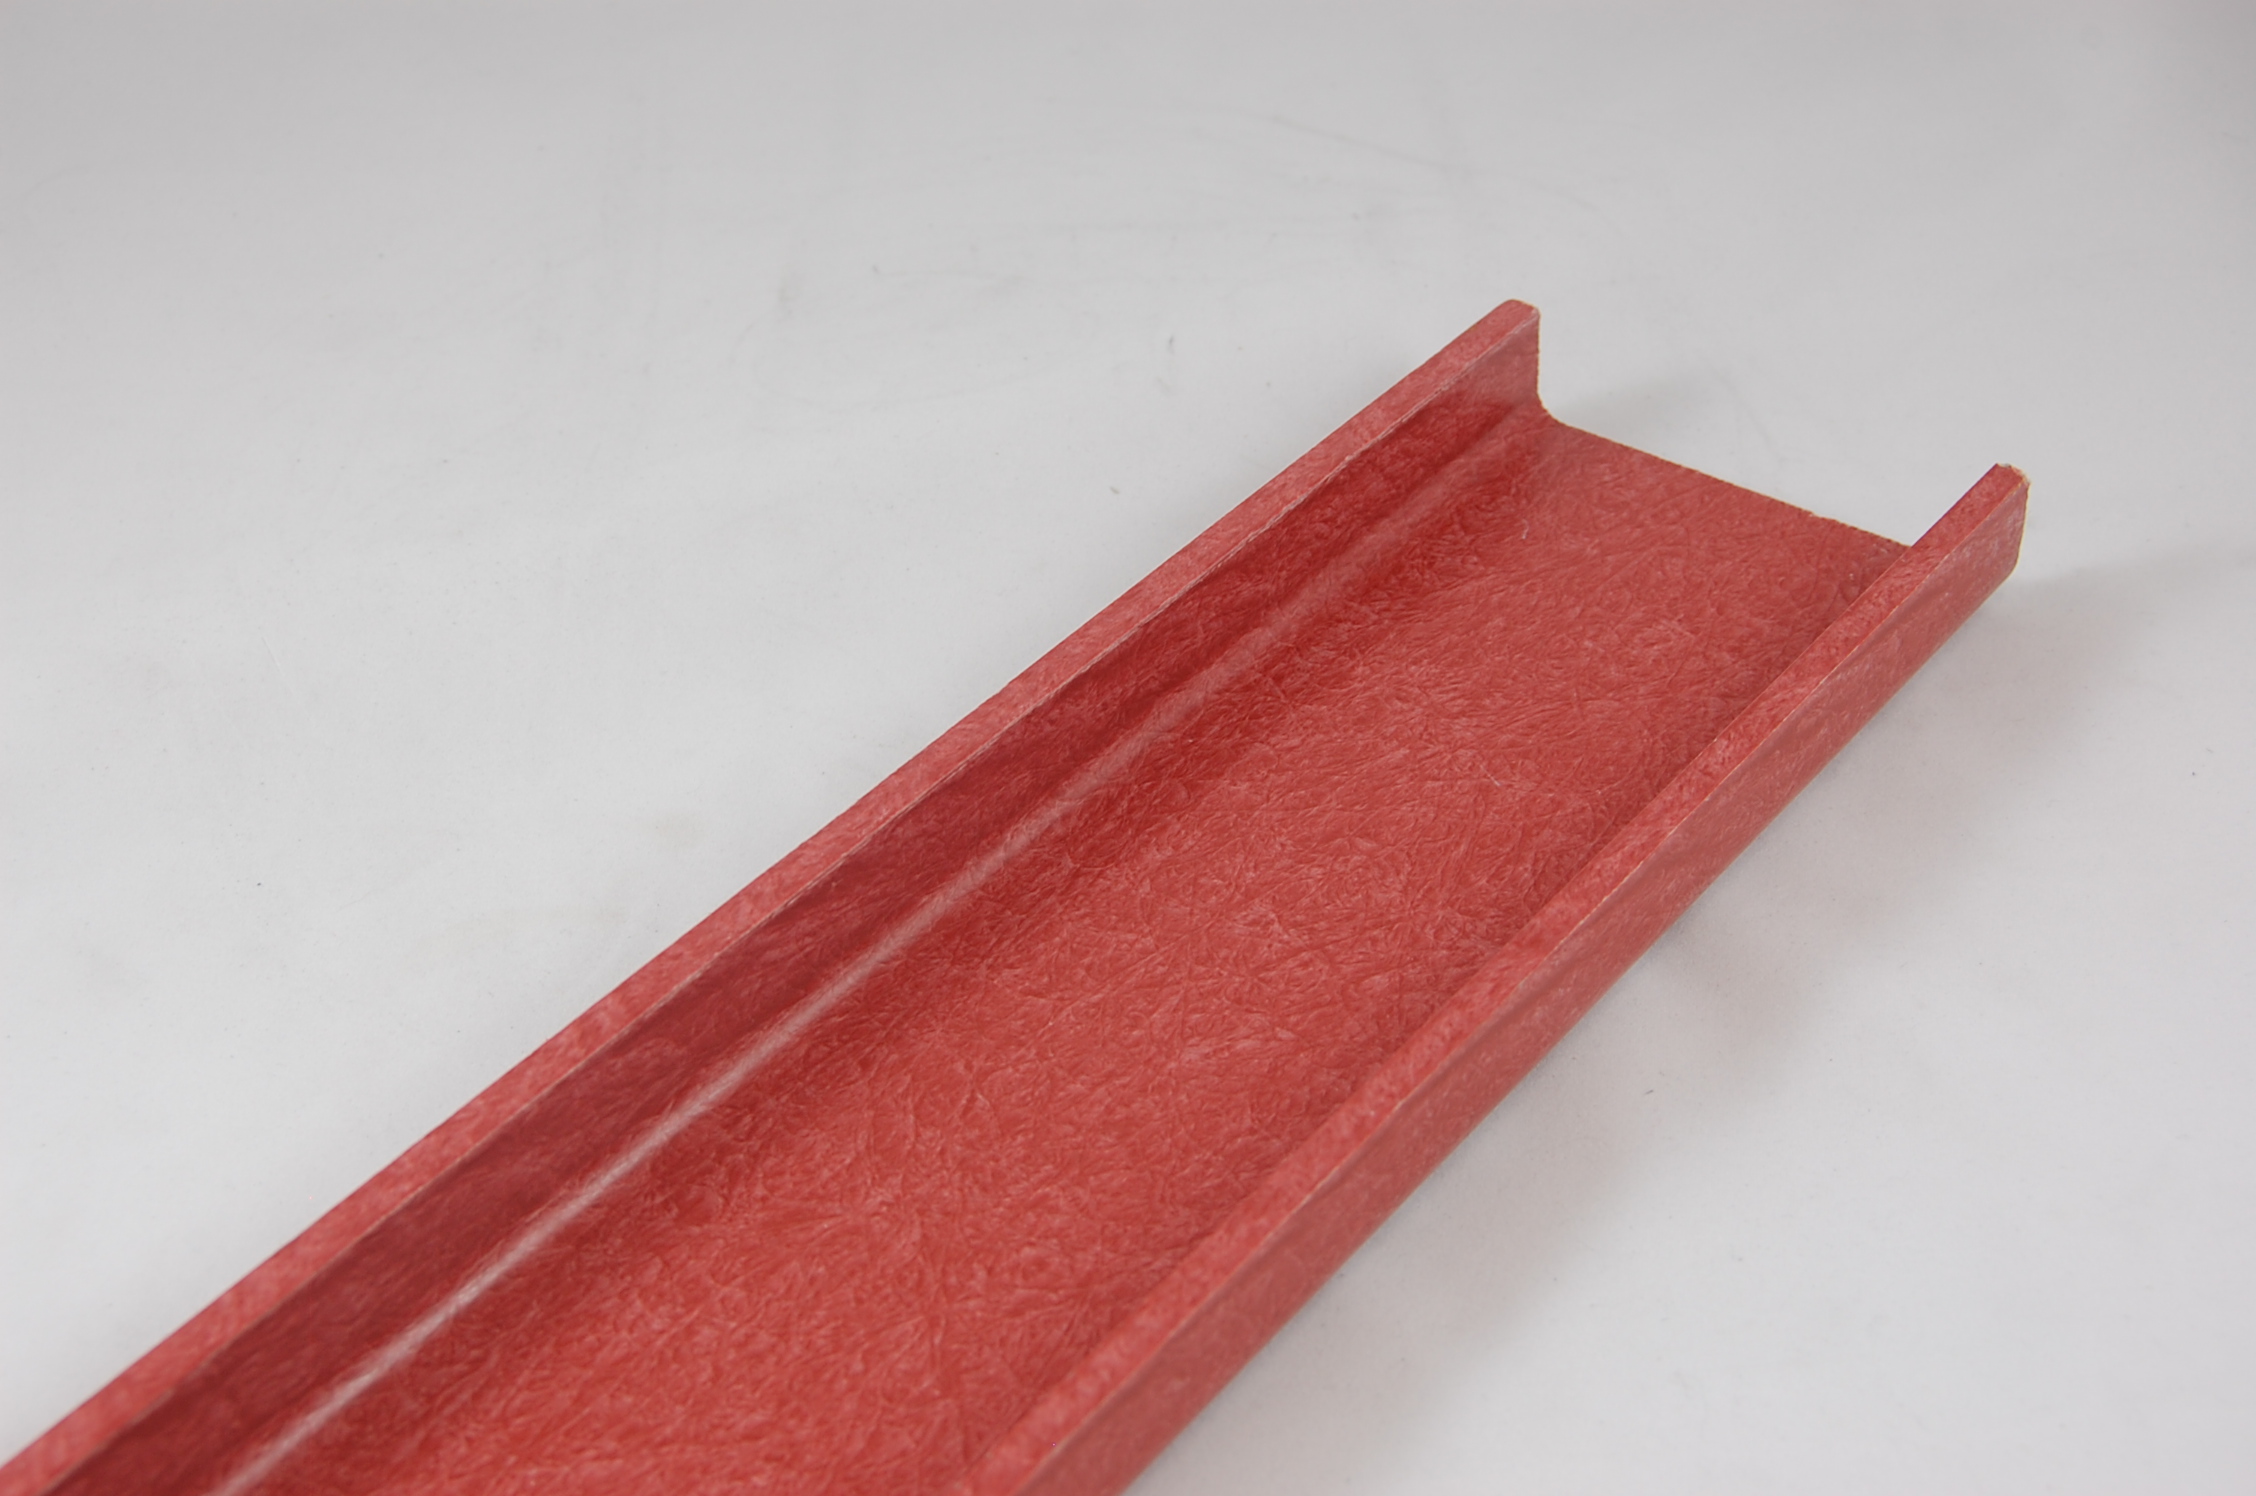 3"W x 7/8" Leg x 1/4" thick GLASROD® Grade 1130 Fiberglass-Reinforced Polyester Laminate Channel, red,  120"L channel